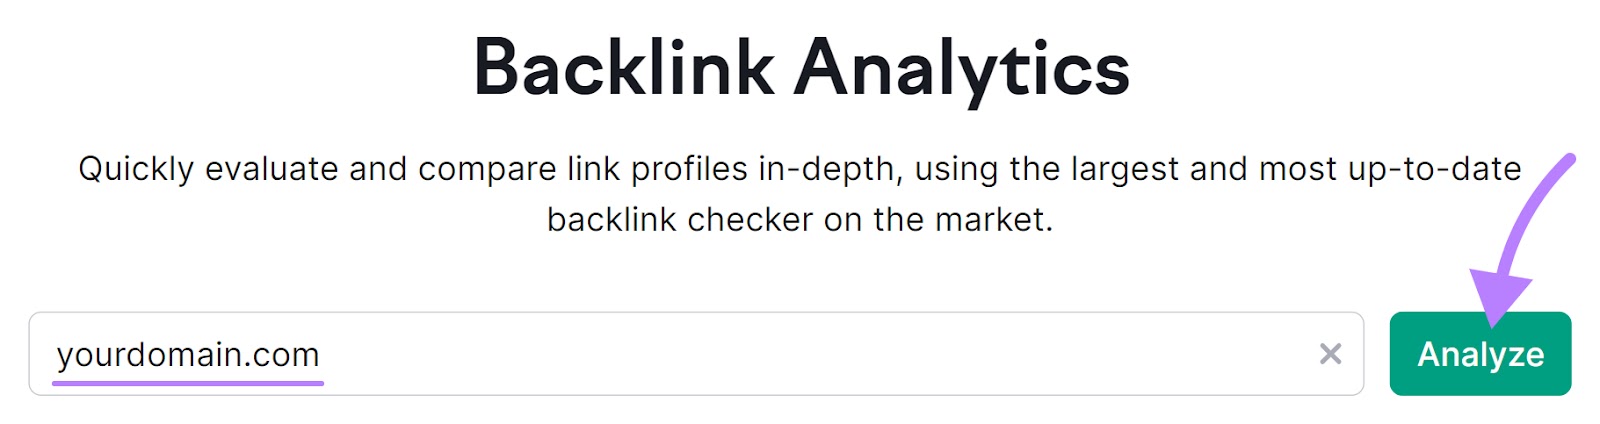 Domain entered into the Backlink Analytics tool